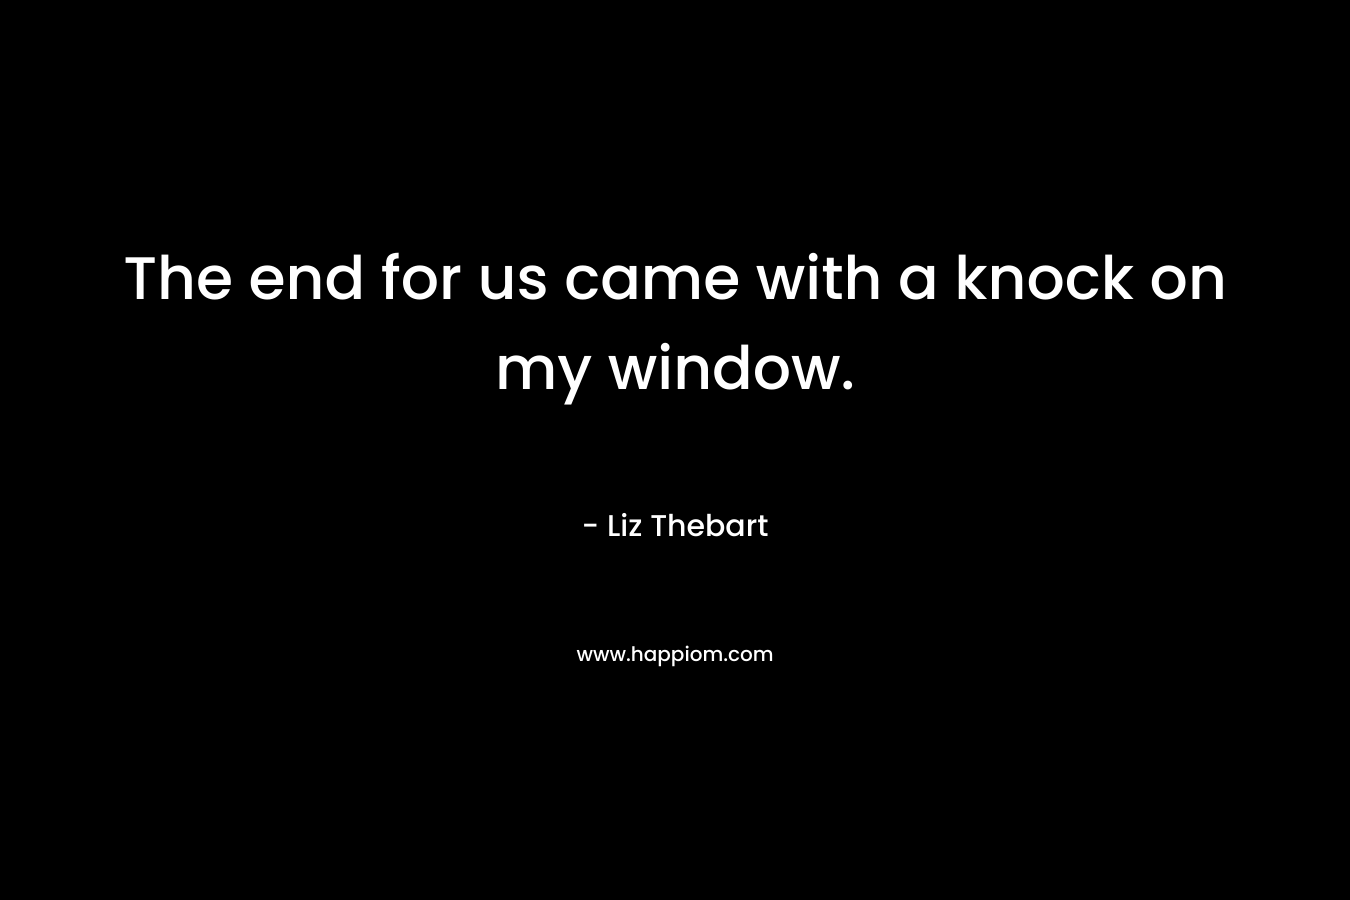 The end for us came with a knock on my window. – Liz Thebart